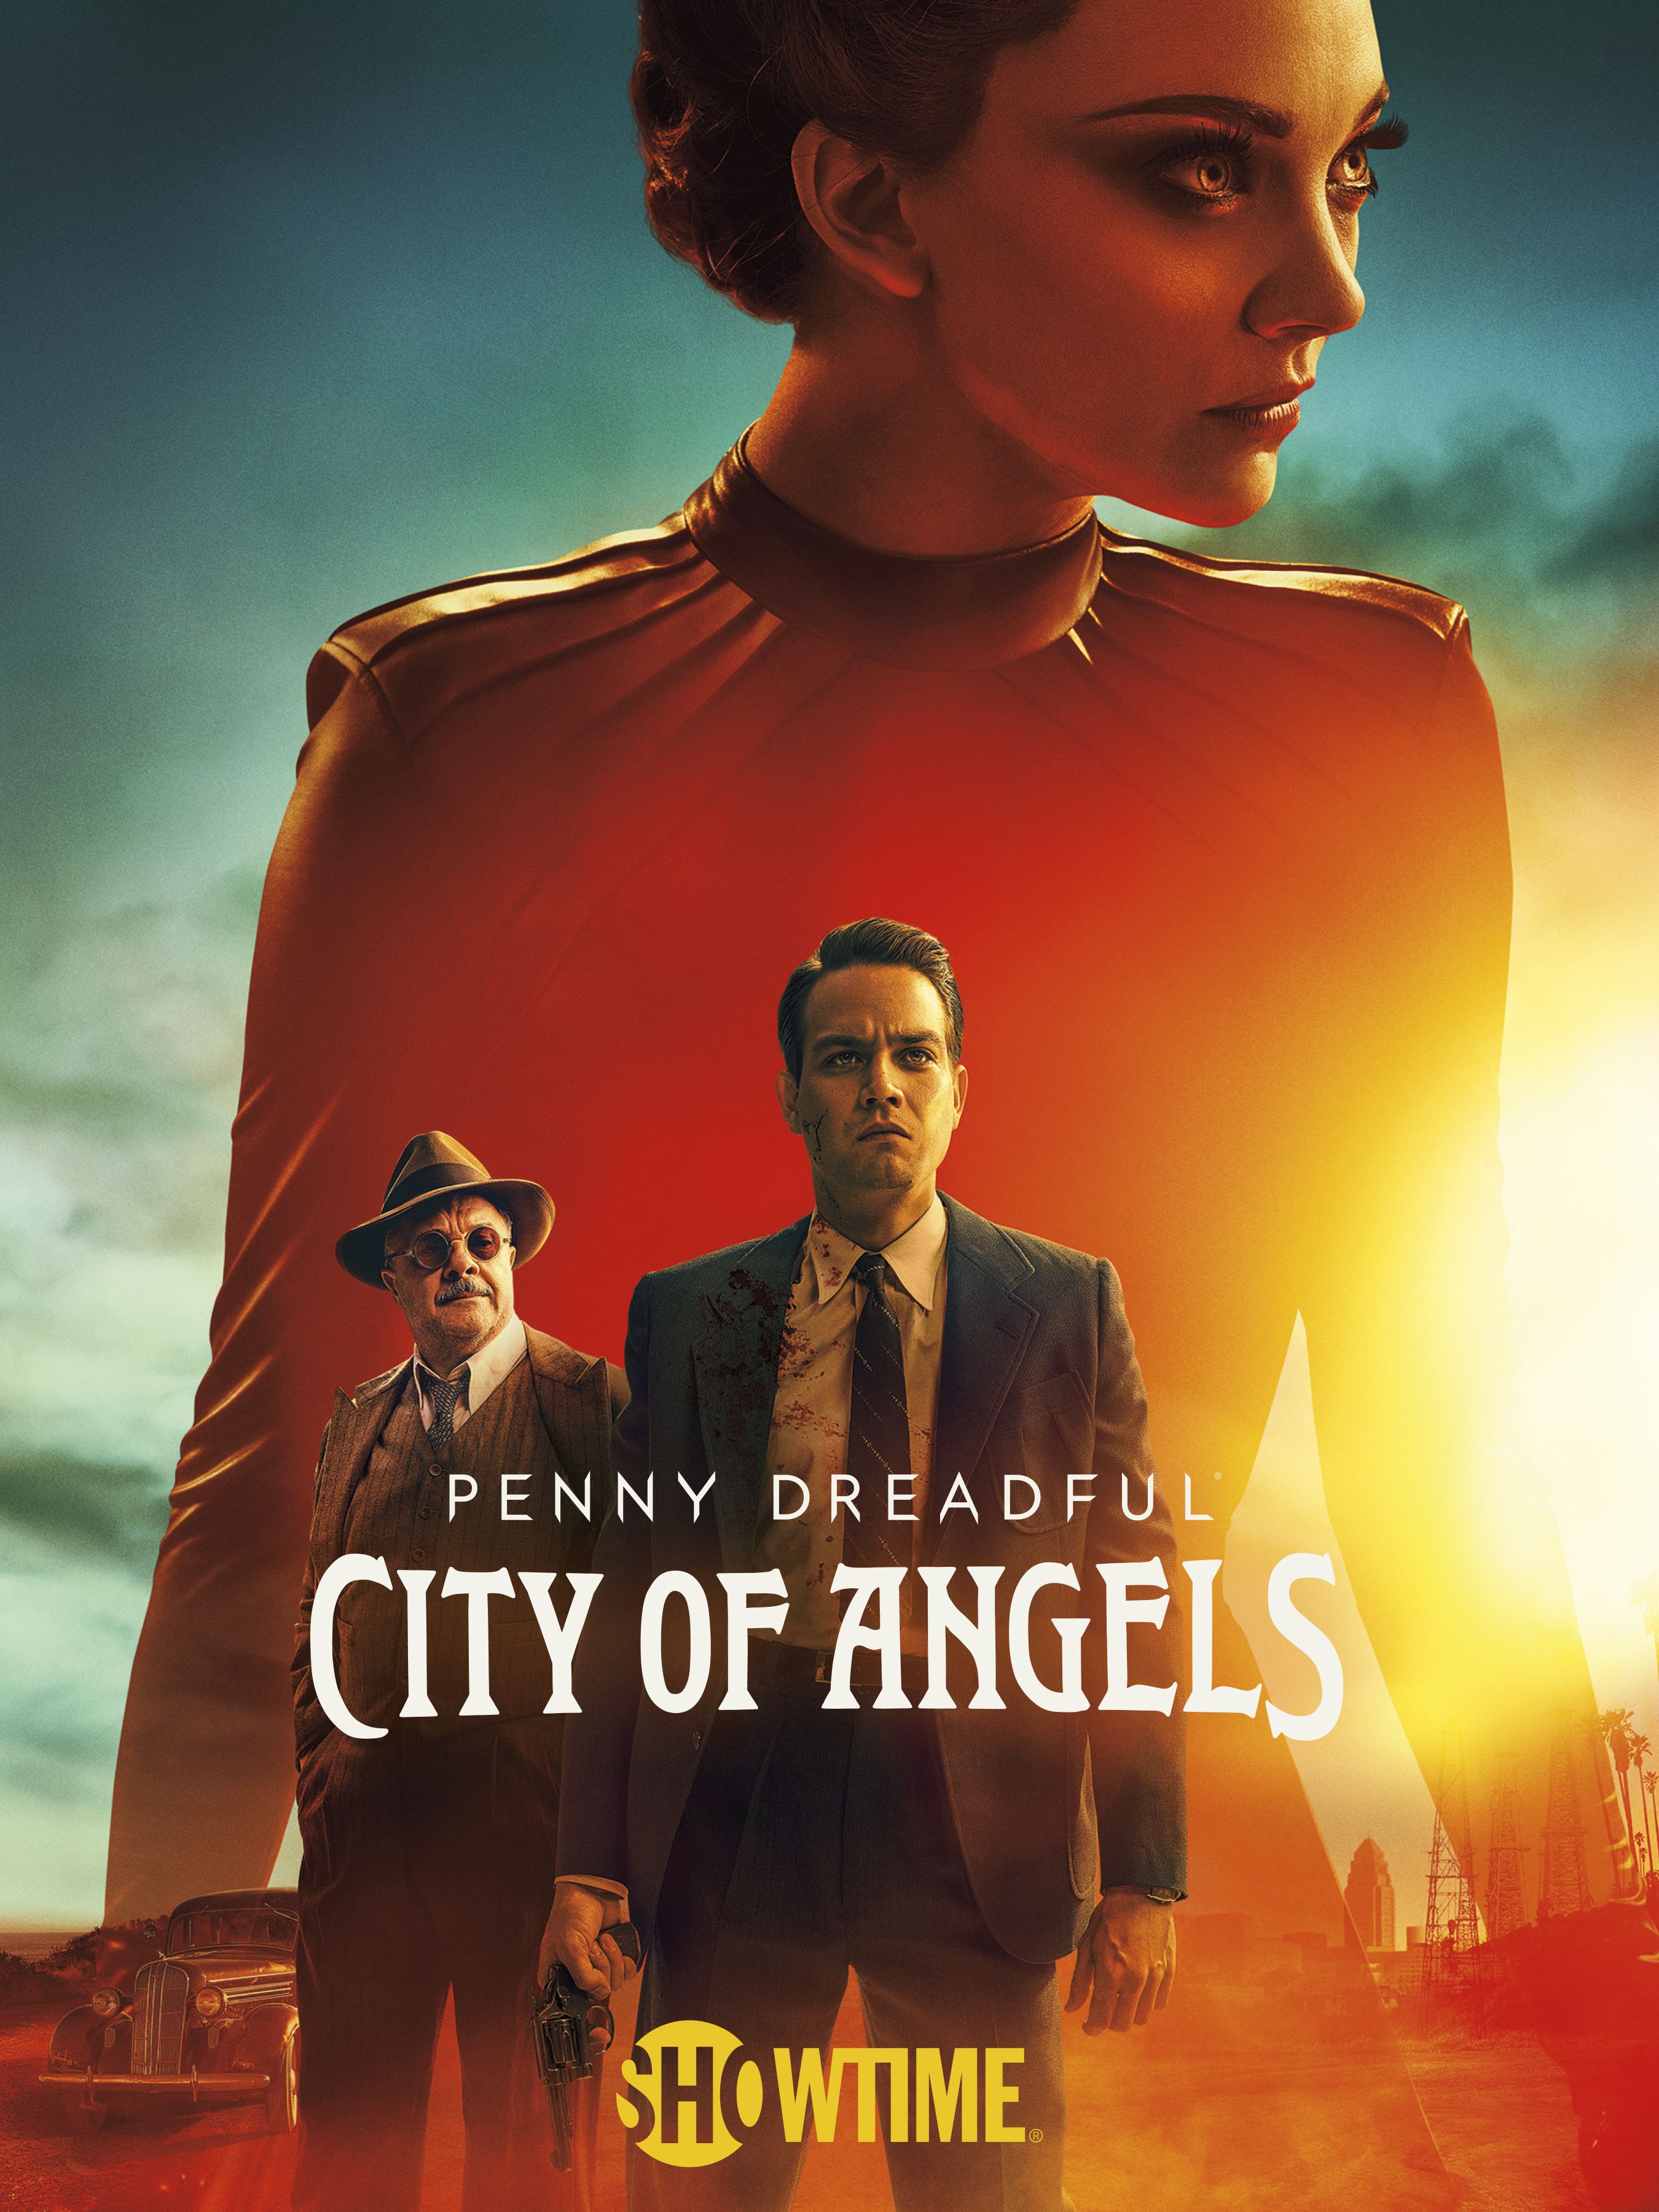 Penny Dreadful City of Angels TV Show Poster